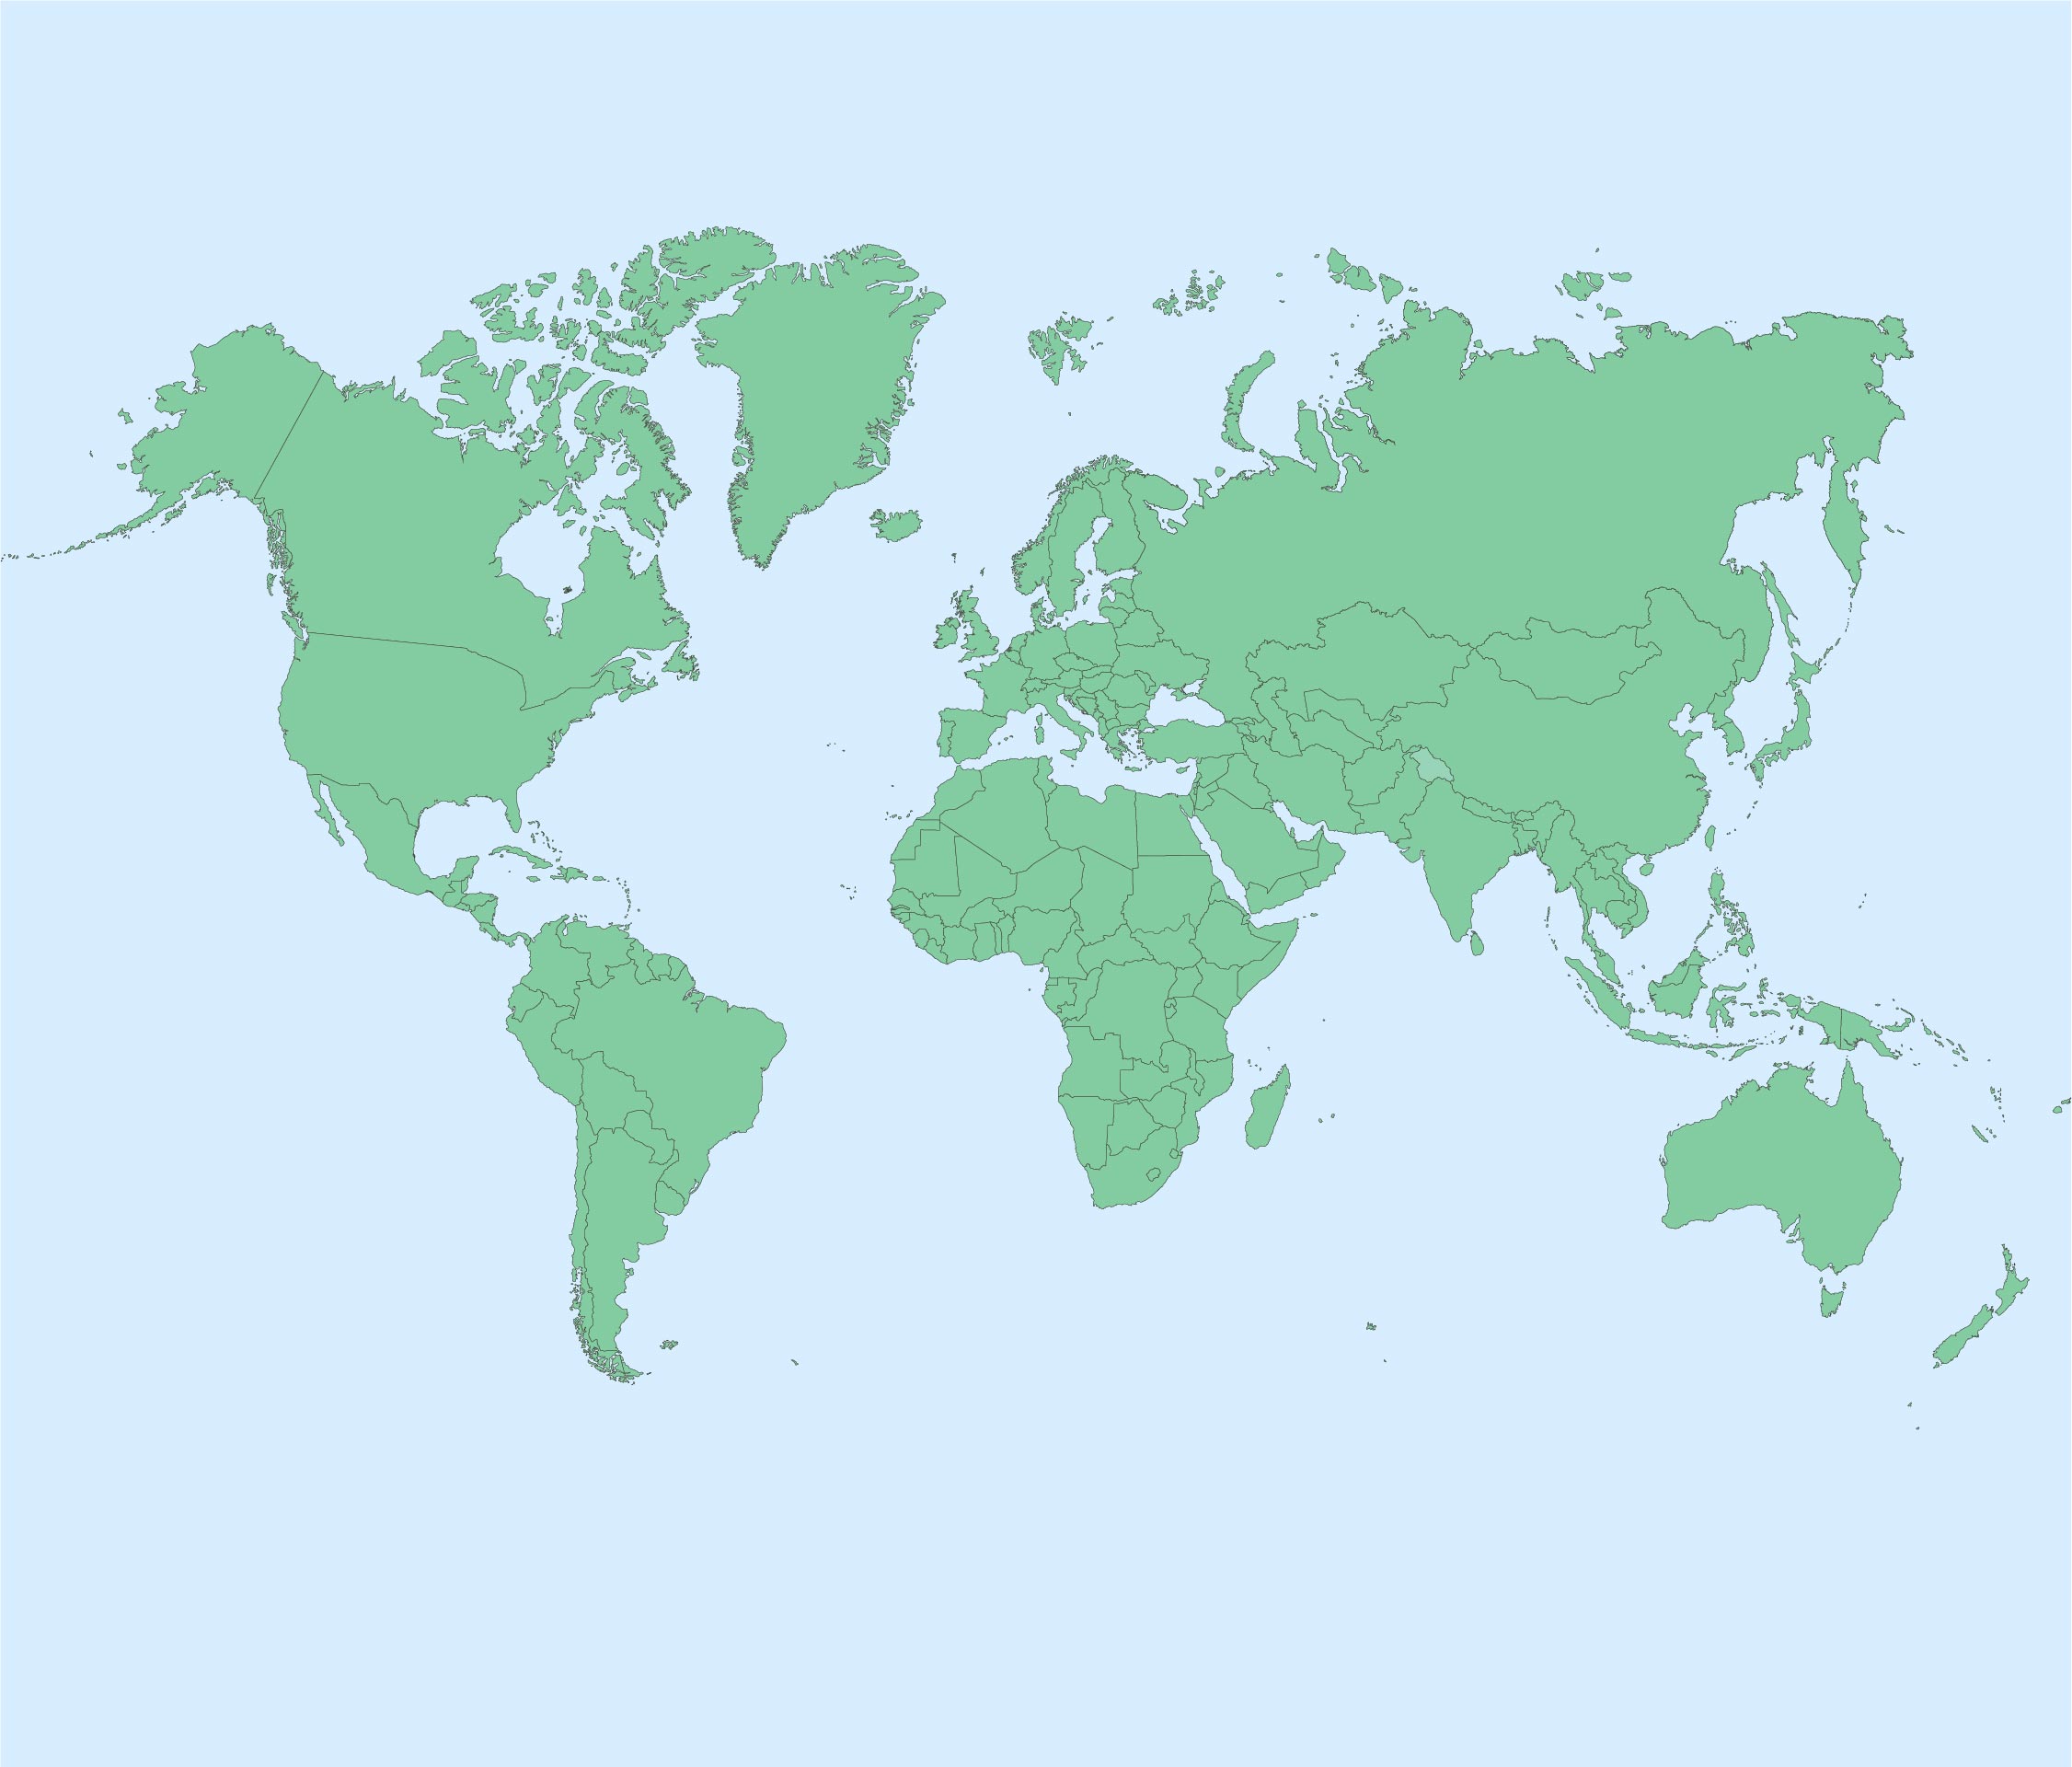 Name All The Countries Without A Map 